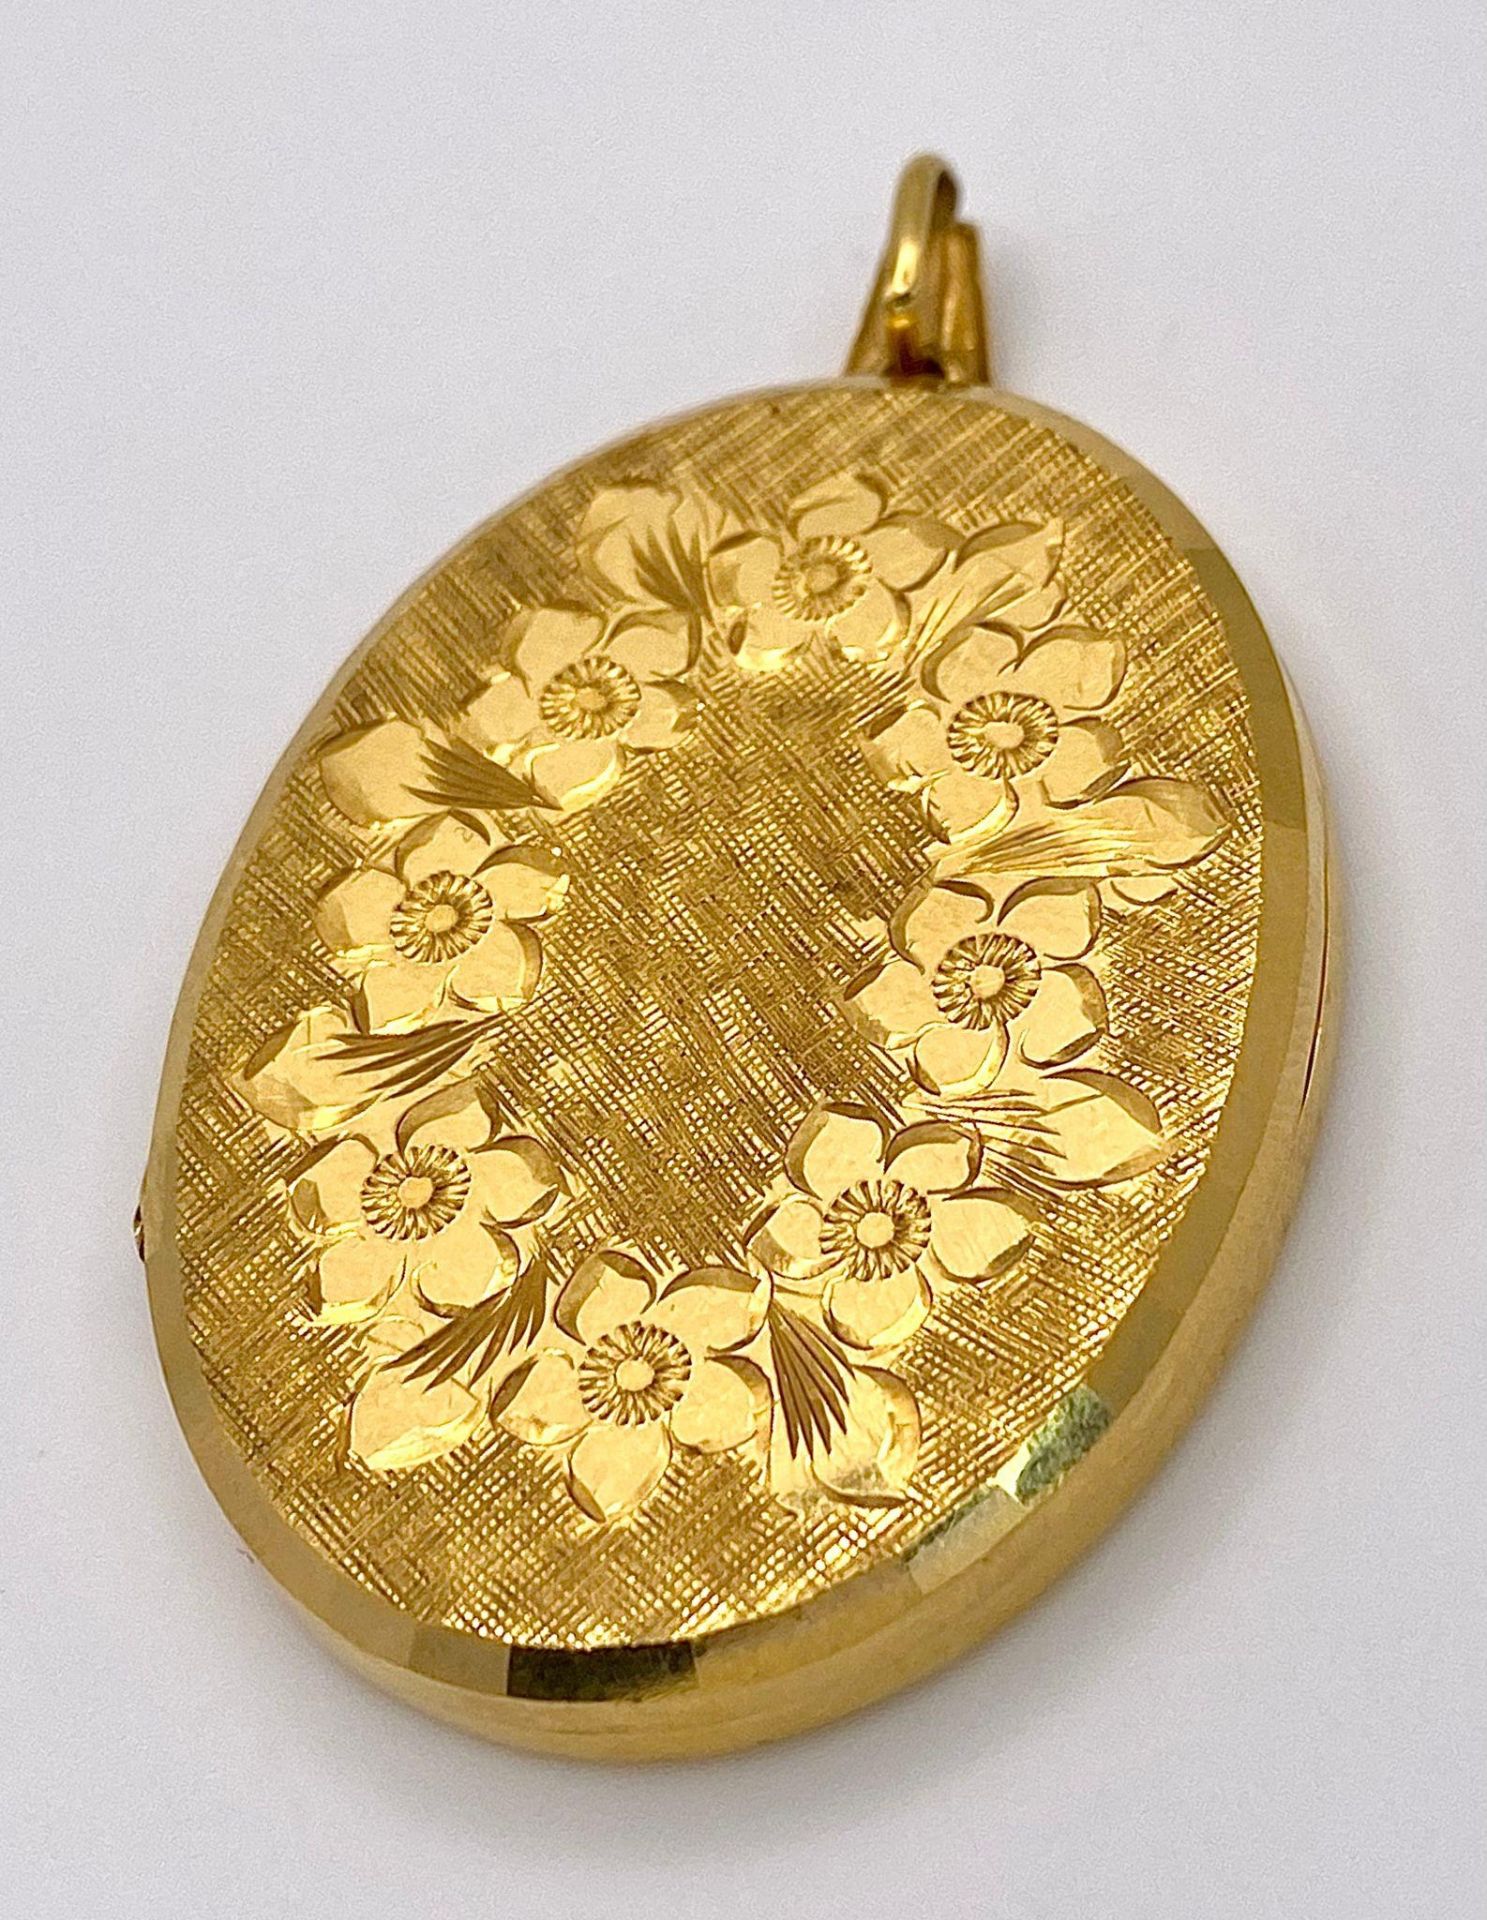 A Large Vintage 9K Yellow Gold Locket Pendant. Classic floral decoration in an oval shape. 6cm. 16.